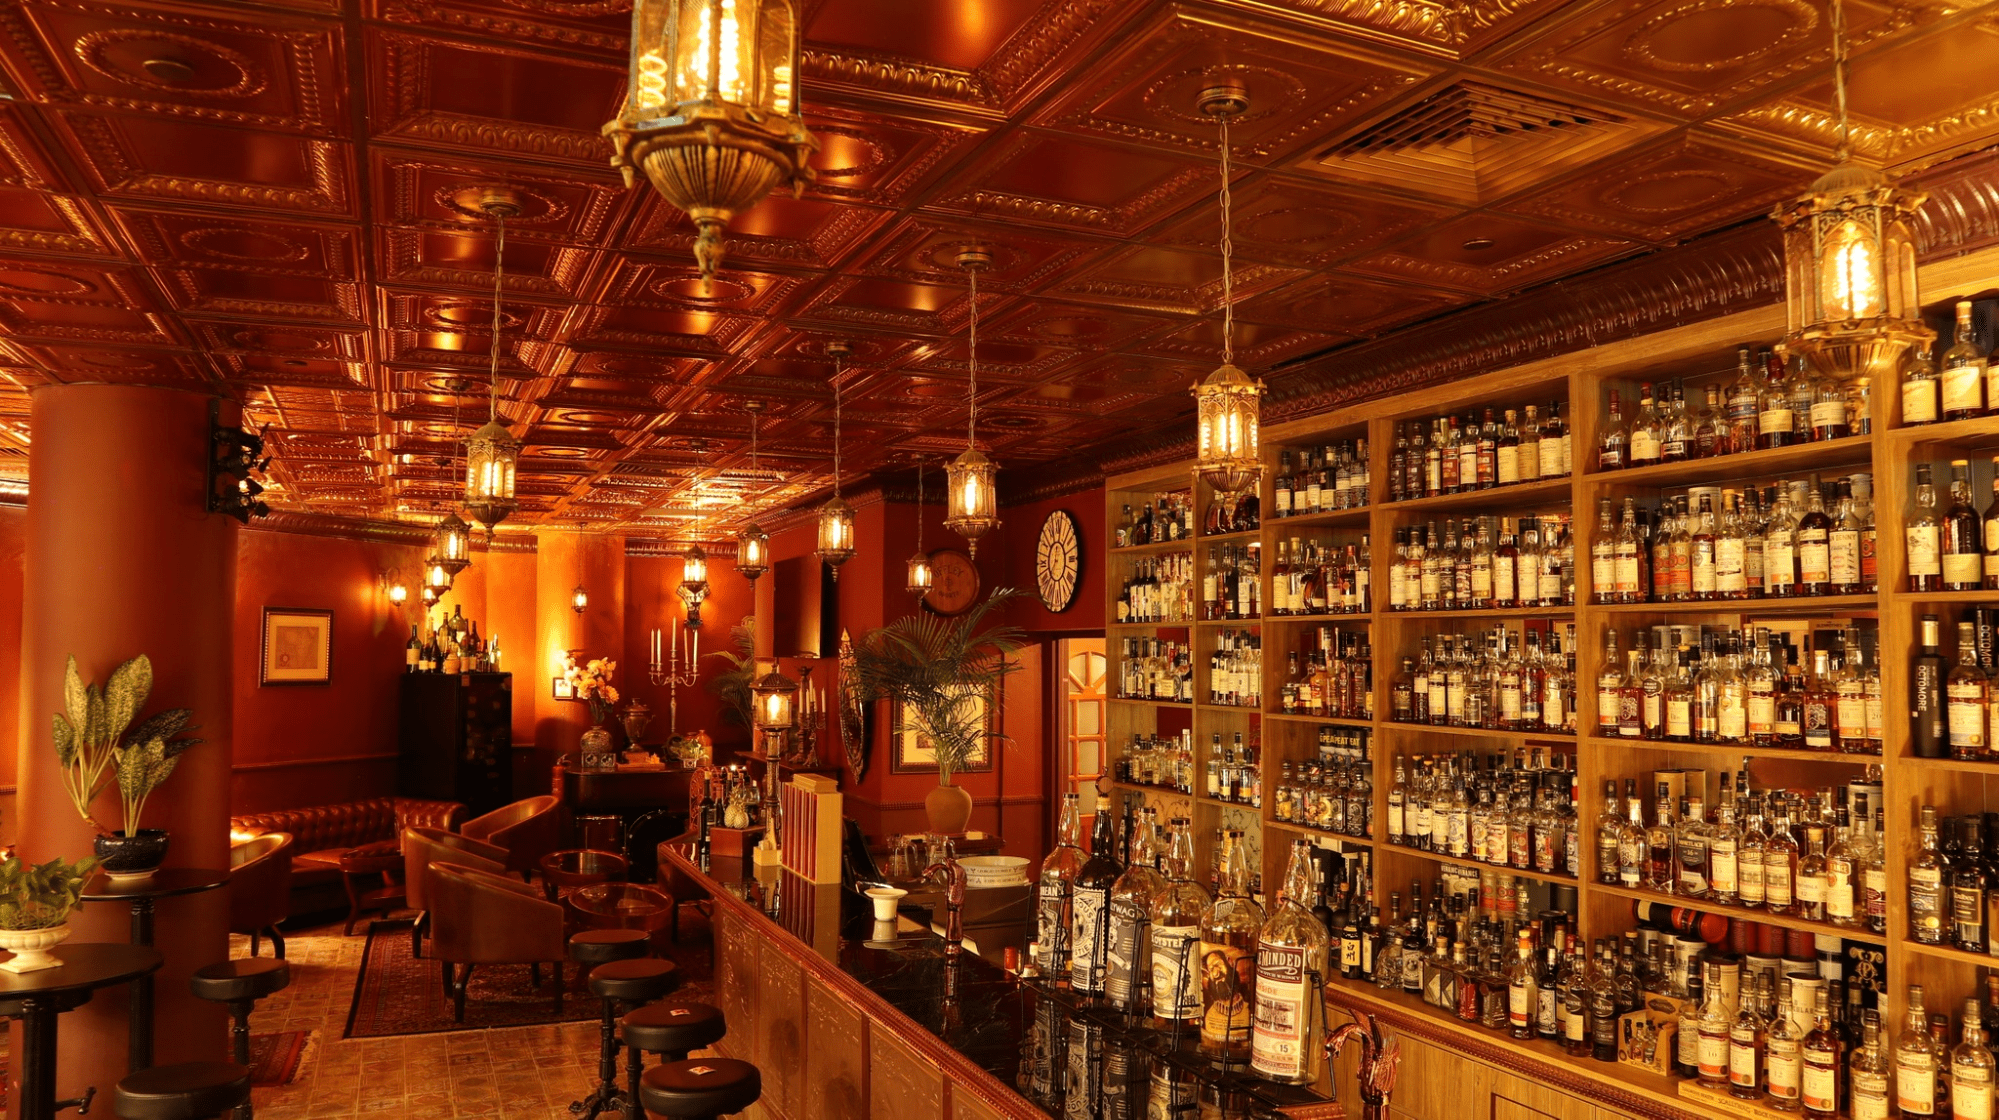 Whisky Clubs In Singapore - The ExciseMan Wine & Whisky Bar Interior